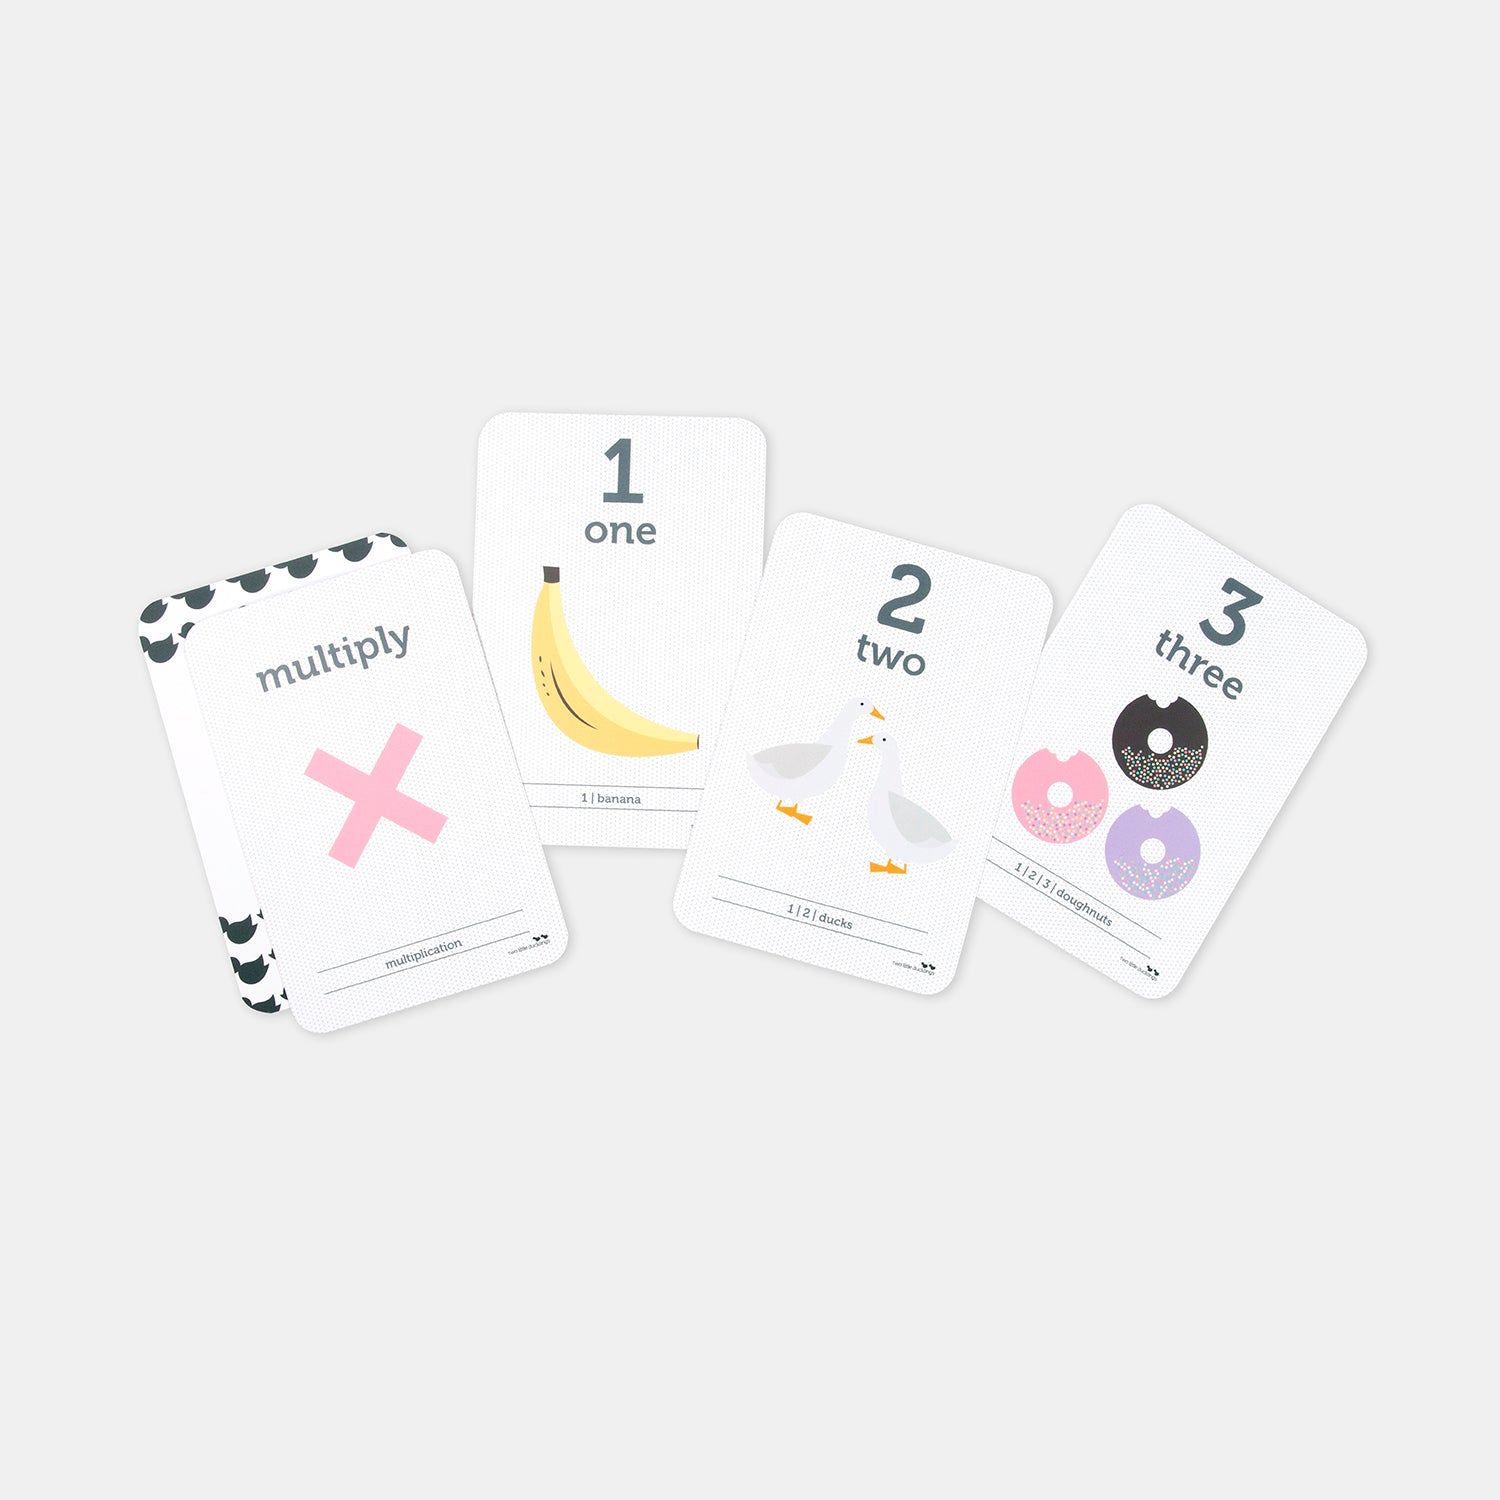 Counting and Math Symbols Flash Cards